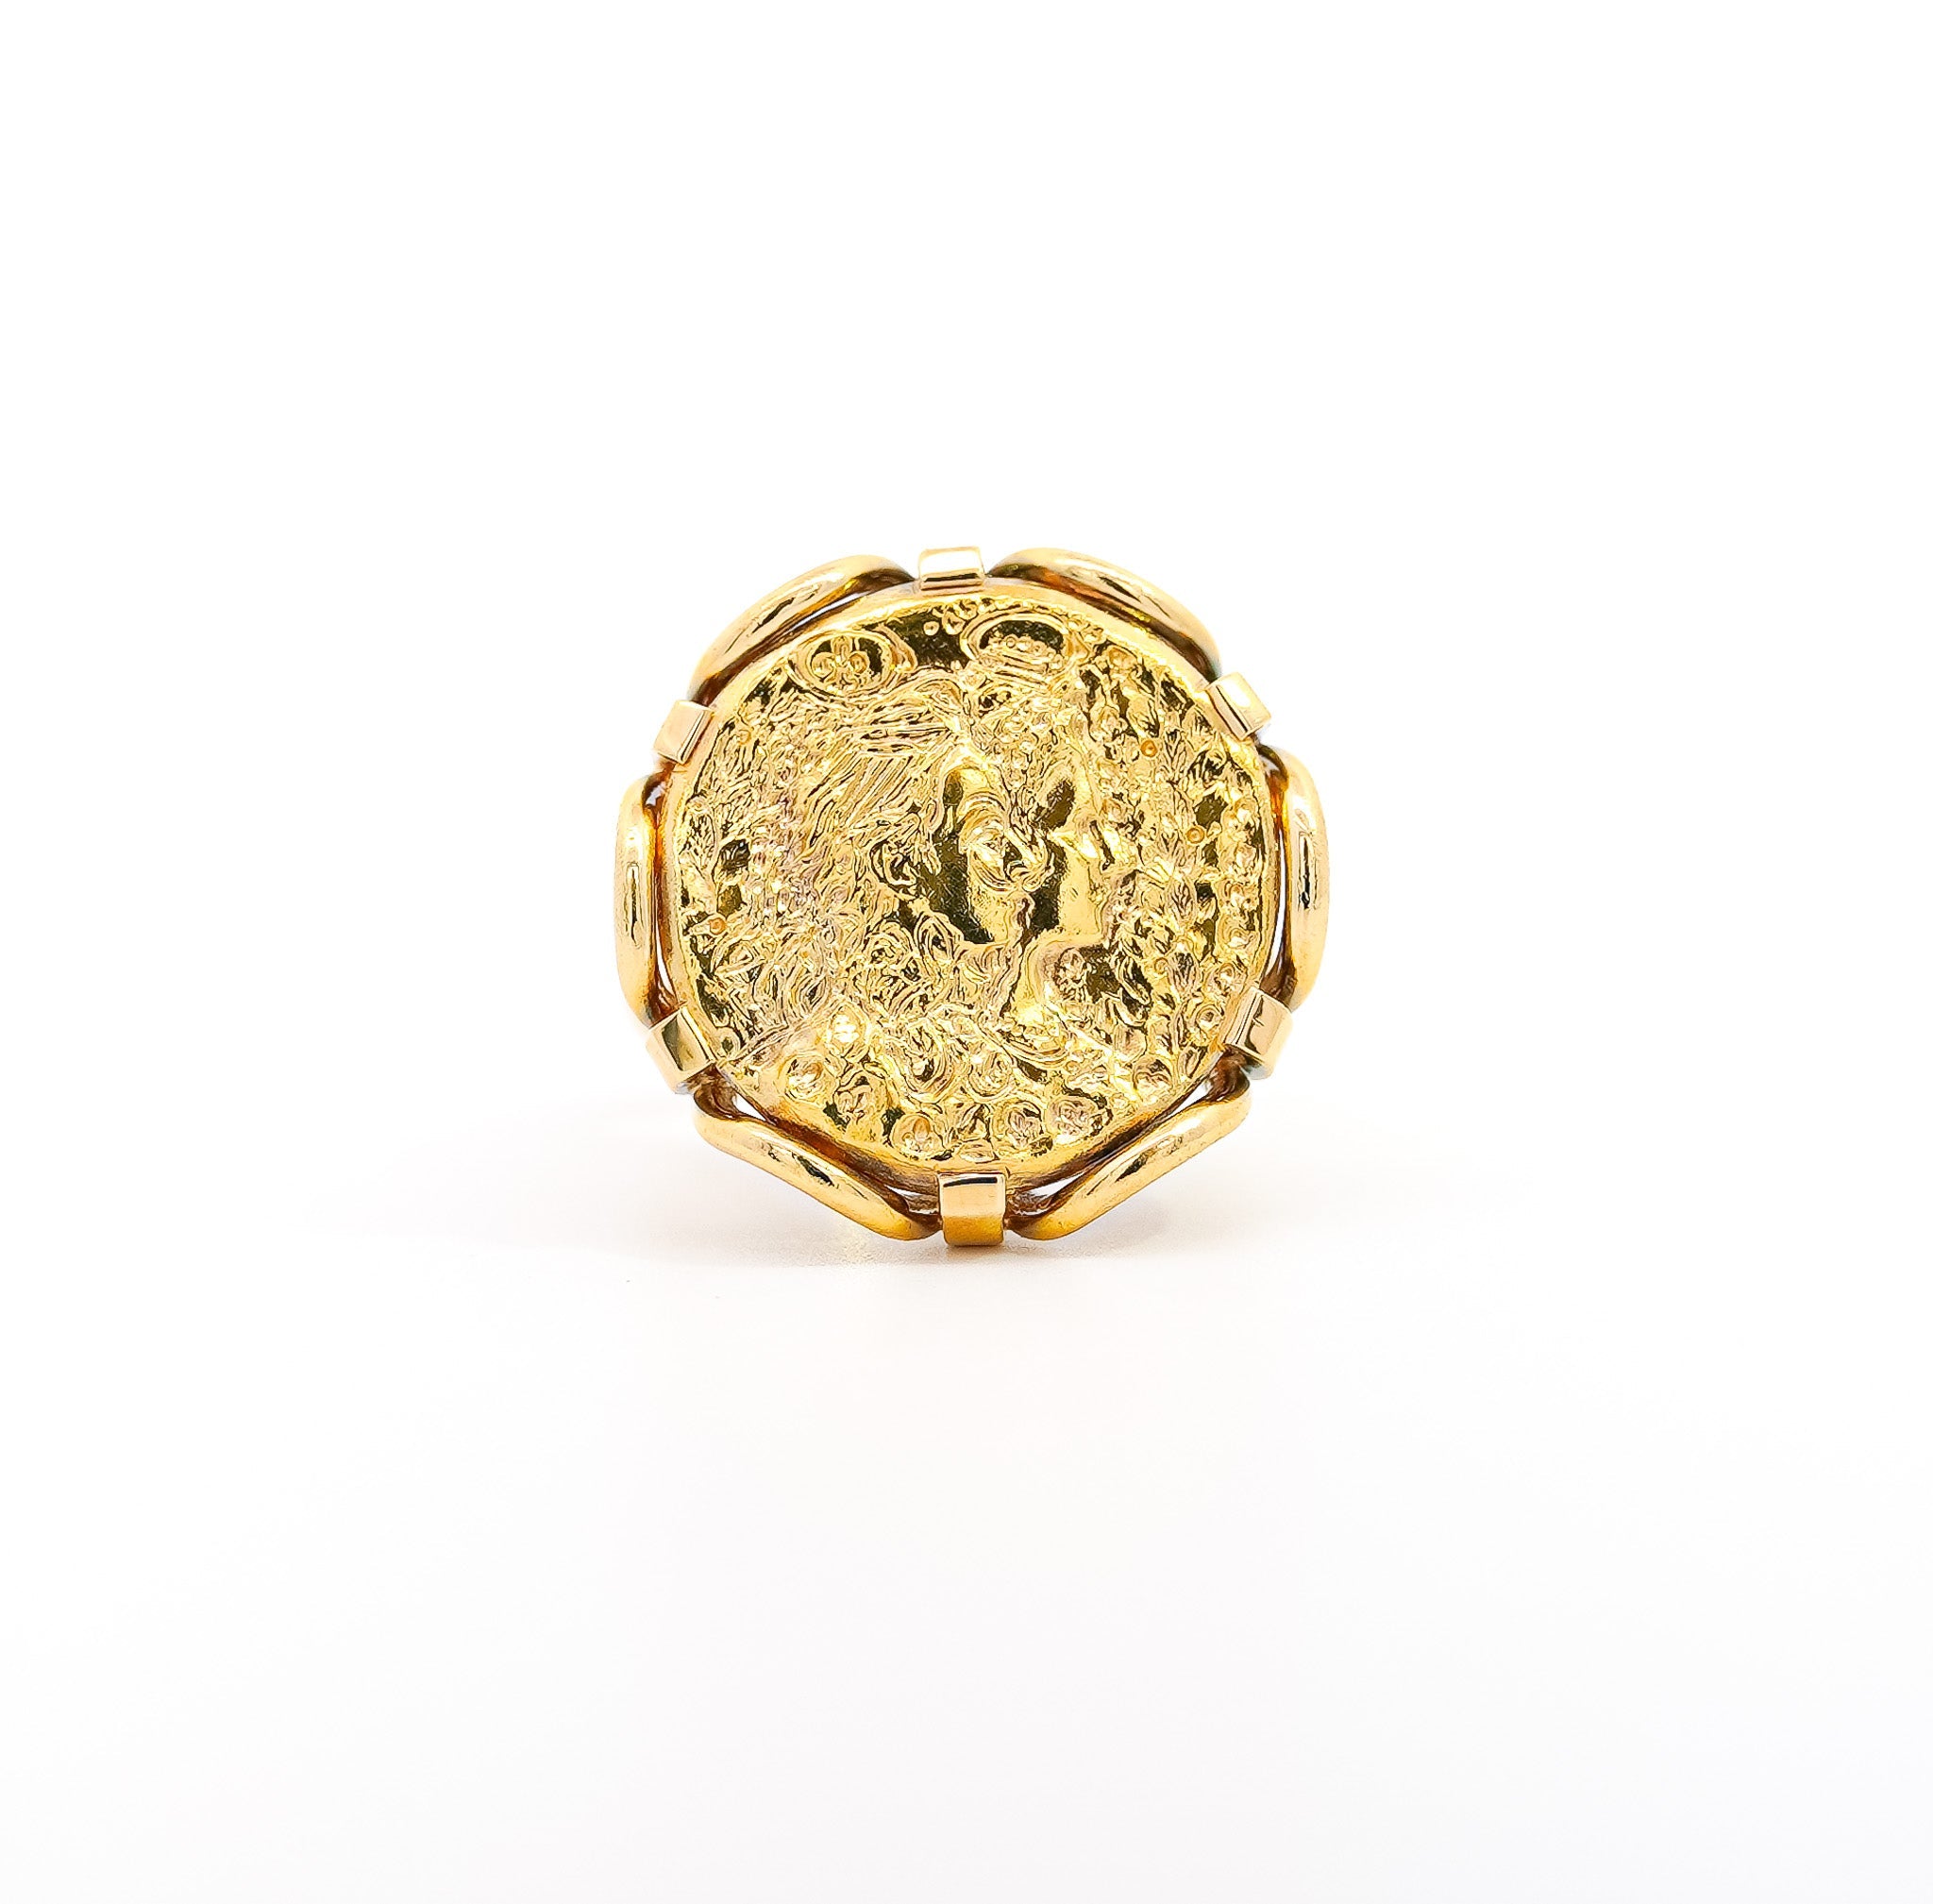 Salvador-Dali-For-Piaget-Dali-dOr-22K-Gold-Coin-Ring-in-18K-Gold-Setting-Retailed-by-Van-Cleef-Arpels-at-Bergdorf-Goodman-Paris-Jewels-Boutique-Rings.jpg